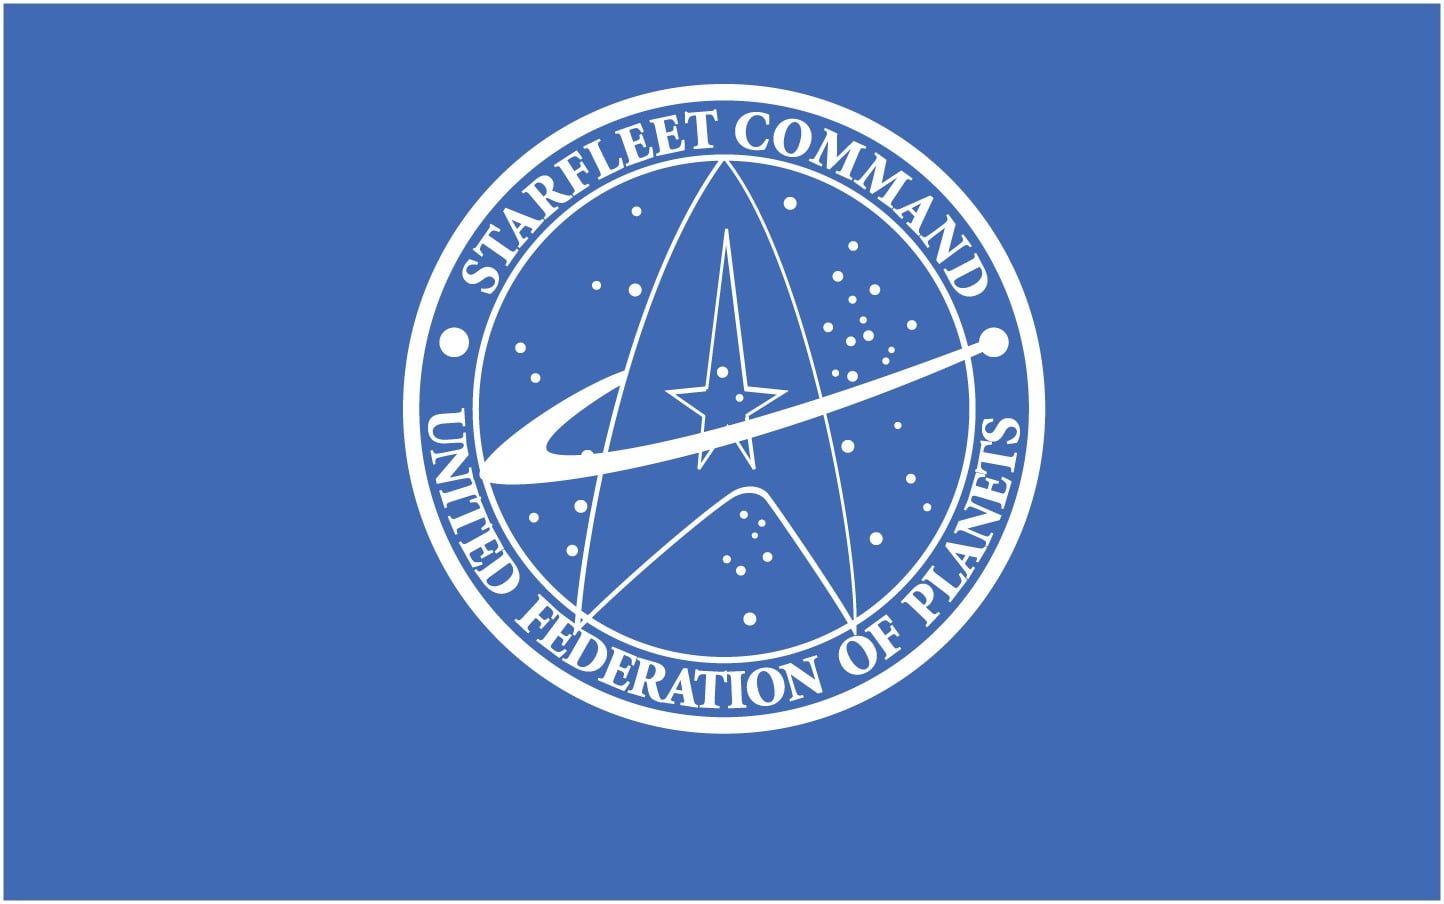 United Federation Of Planets Wallpapers